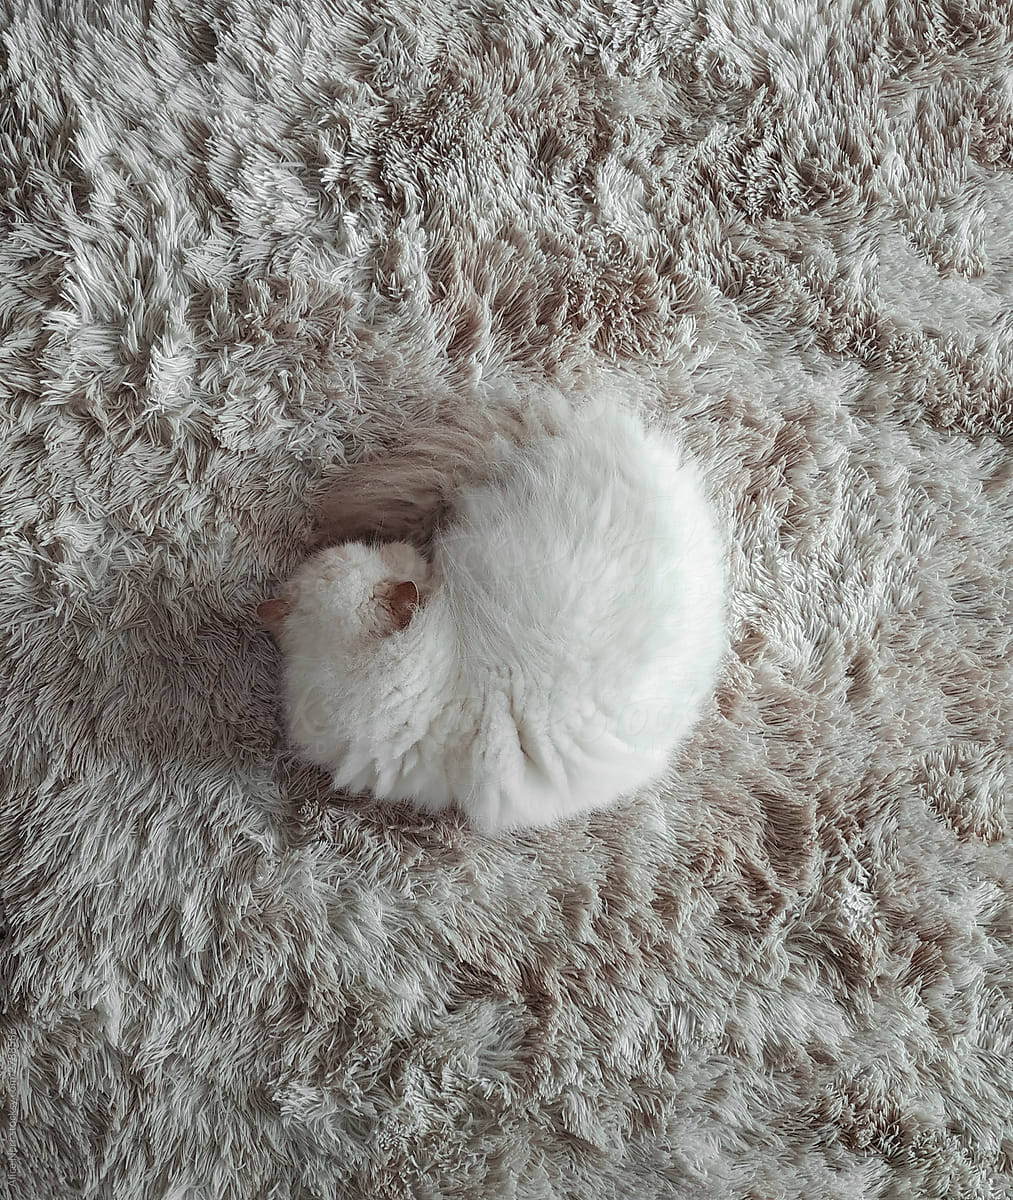 Perfect camouflage